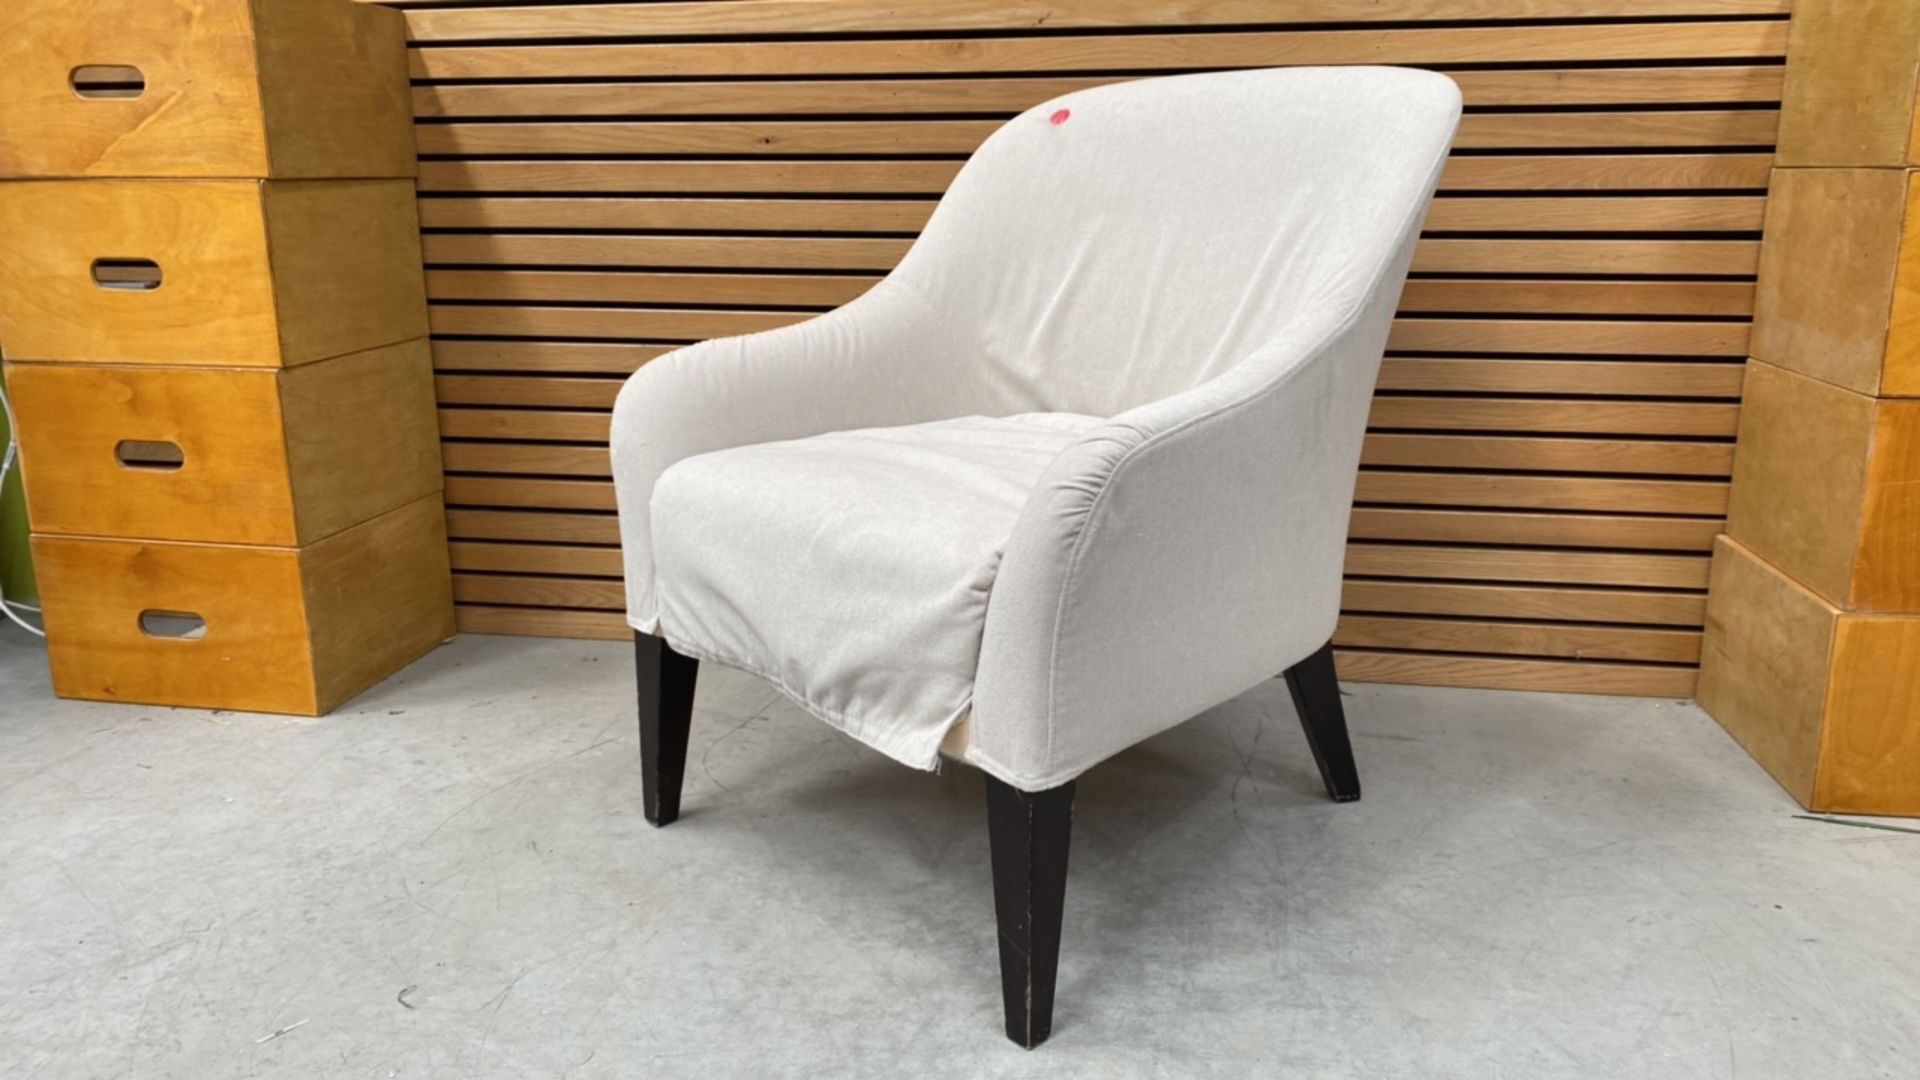 Cream Upholstered Armchair X1 - Image 2 of 3